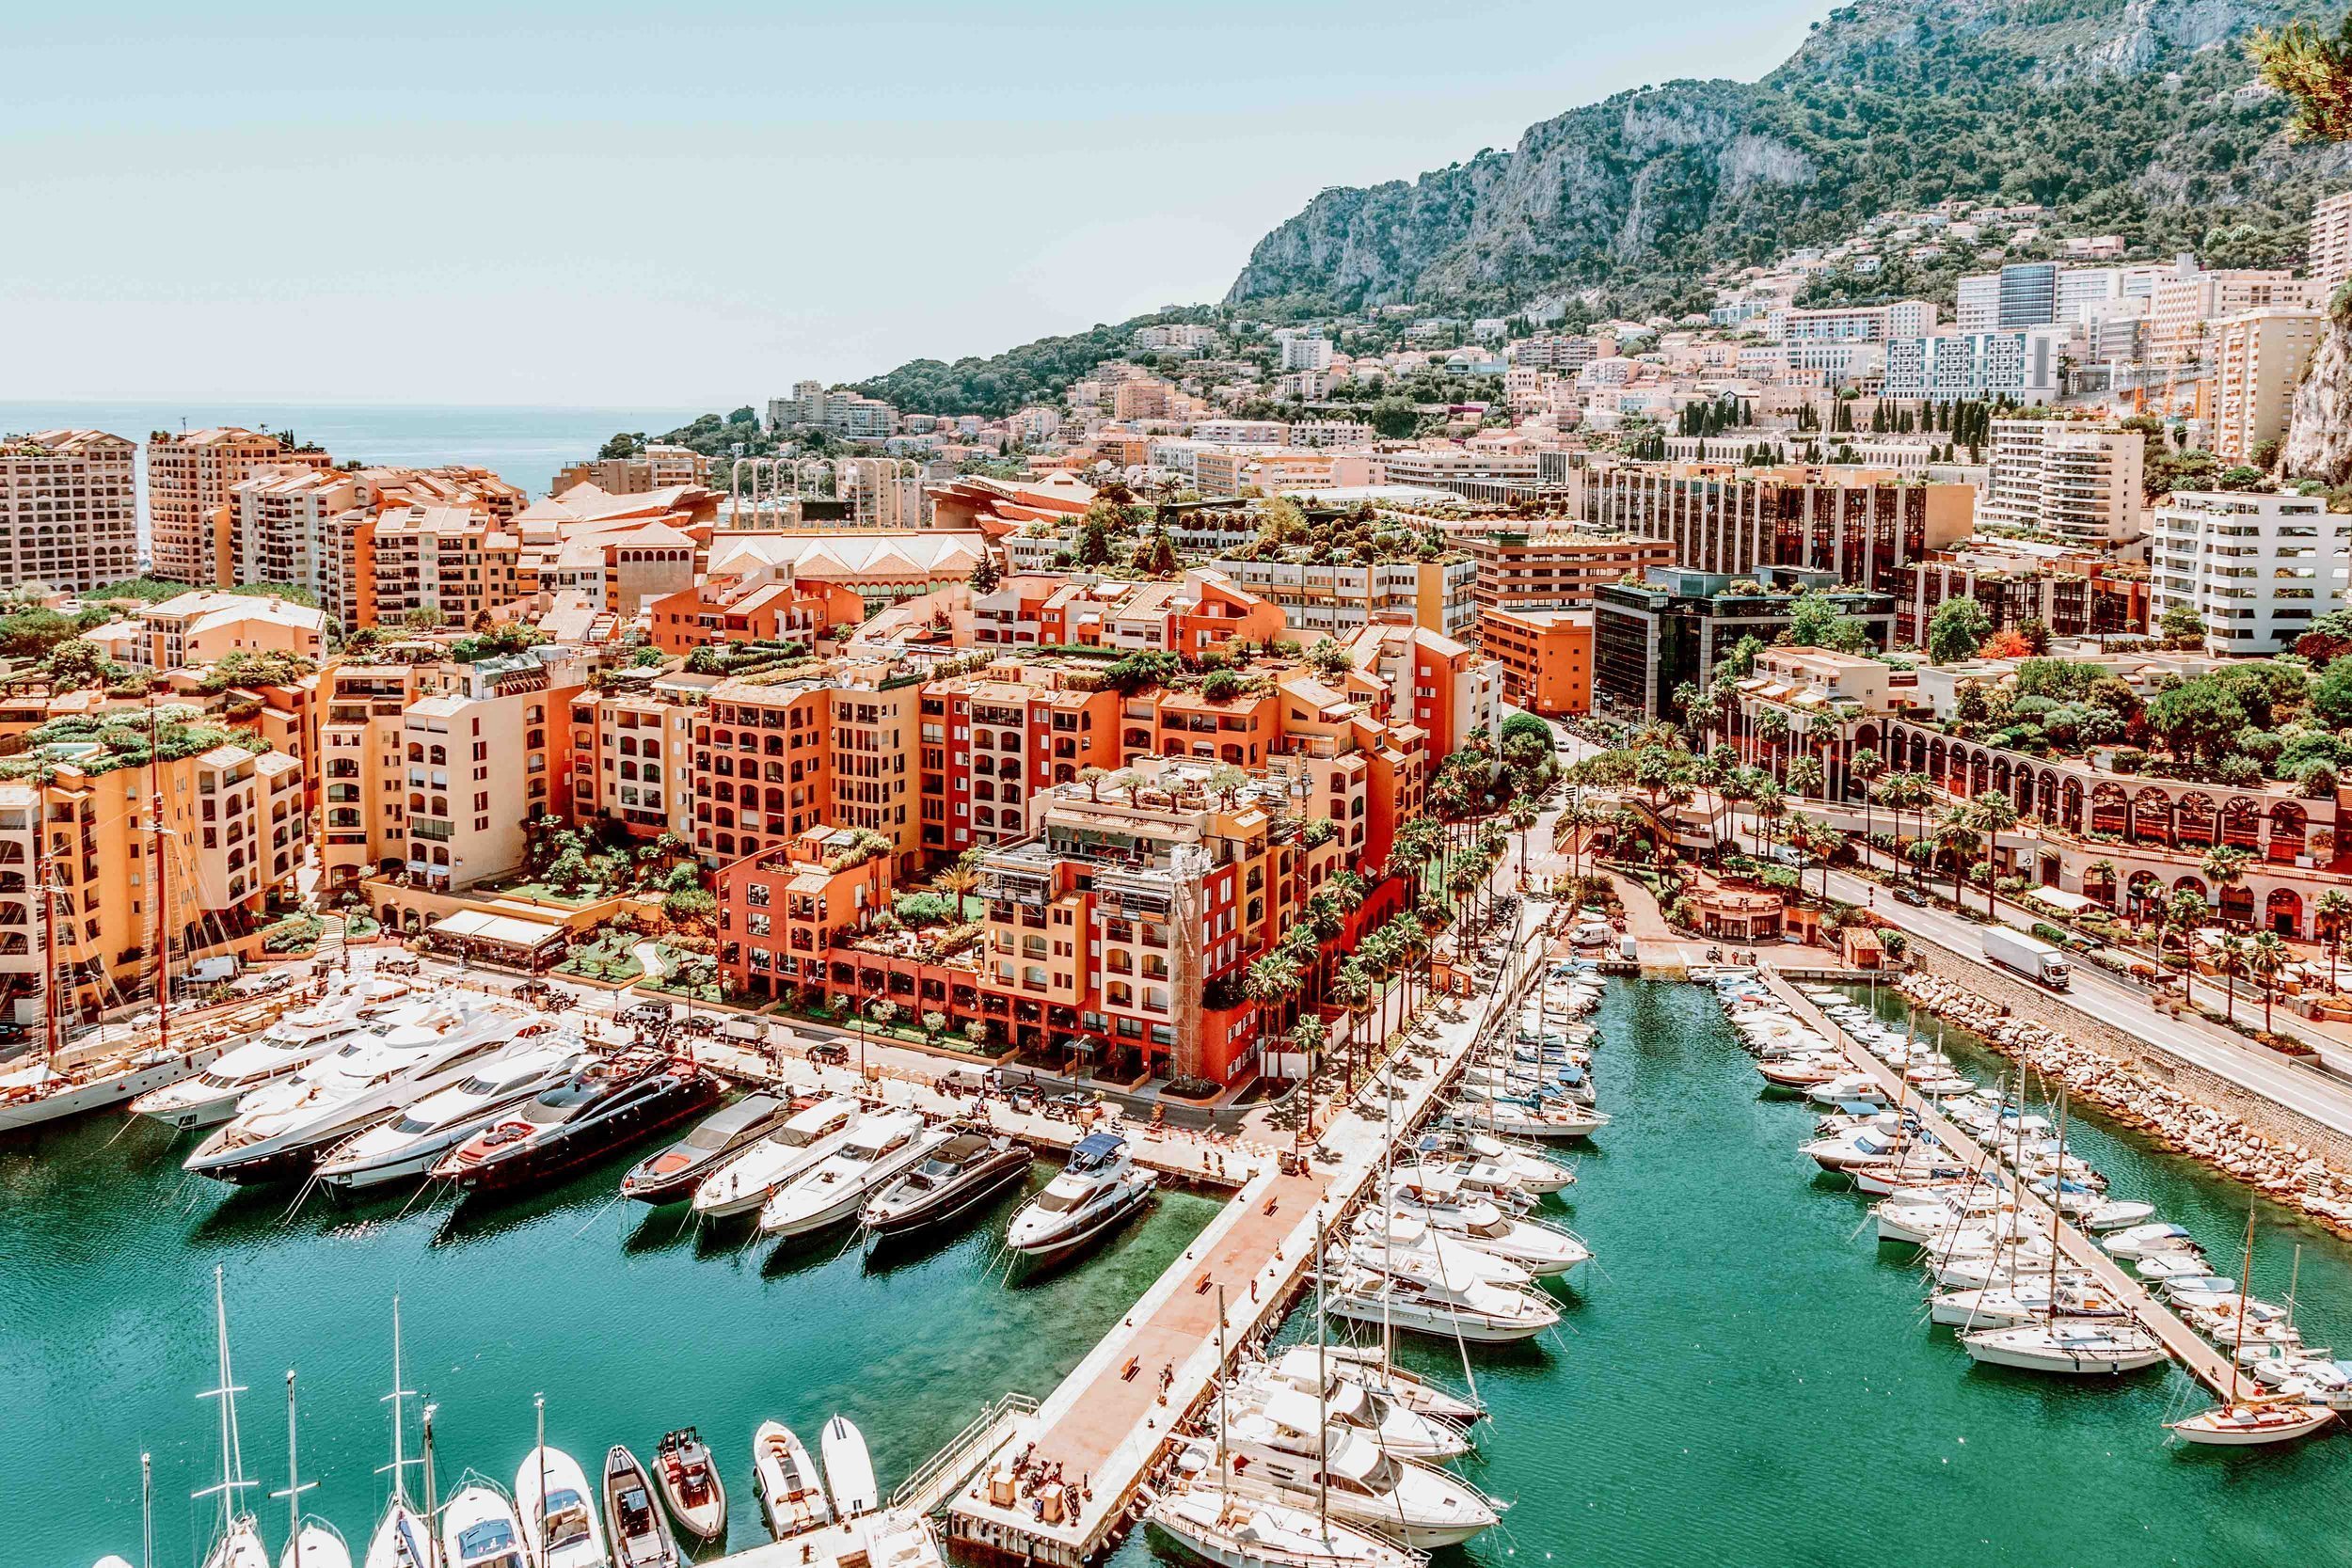 The marina with colourful yachts and colourful buildings in Monaco best summer destinations europe